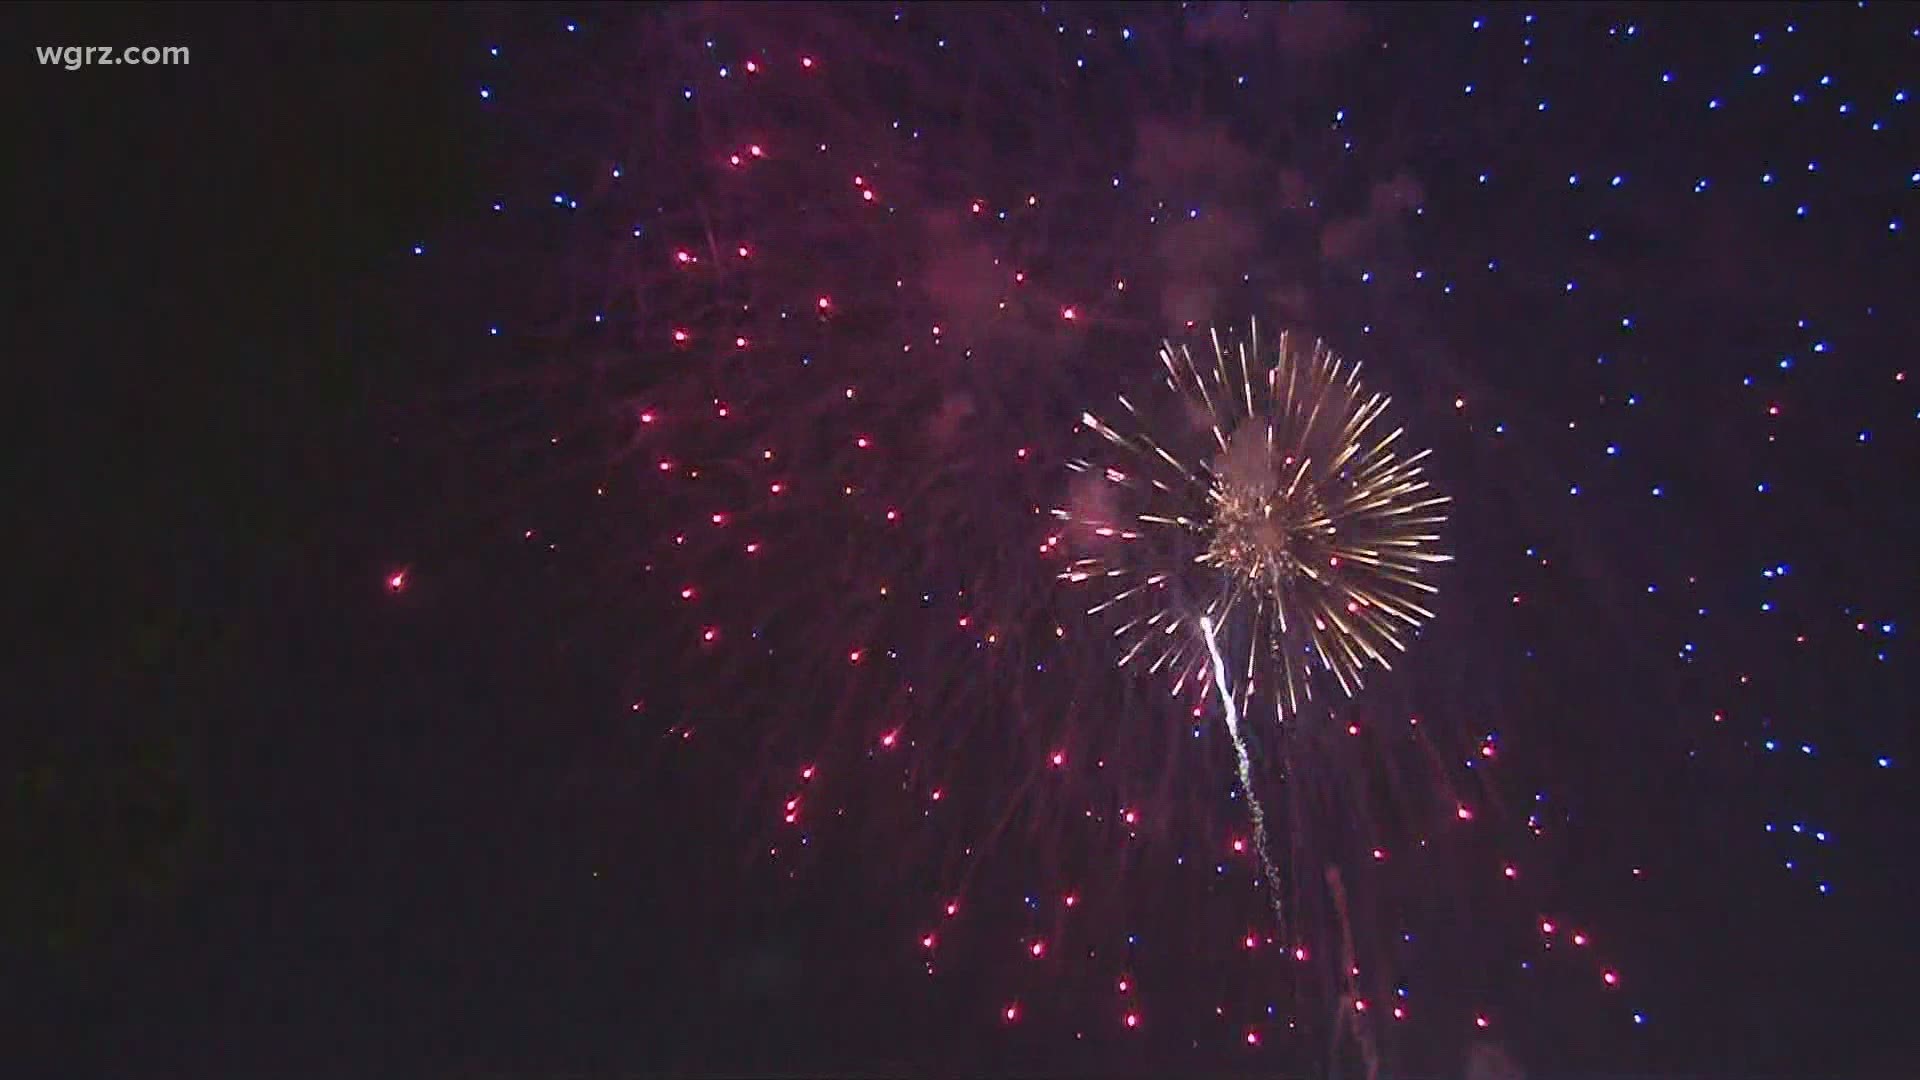 Lots of folks were out tonight celebrating with friends and family as they enjoyed scenic displays of fireworks across the sky.